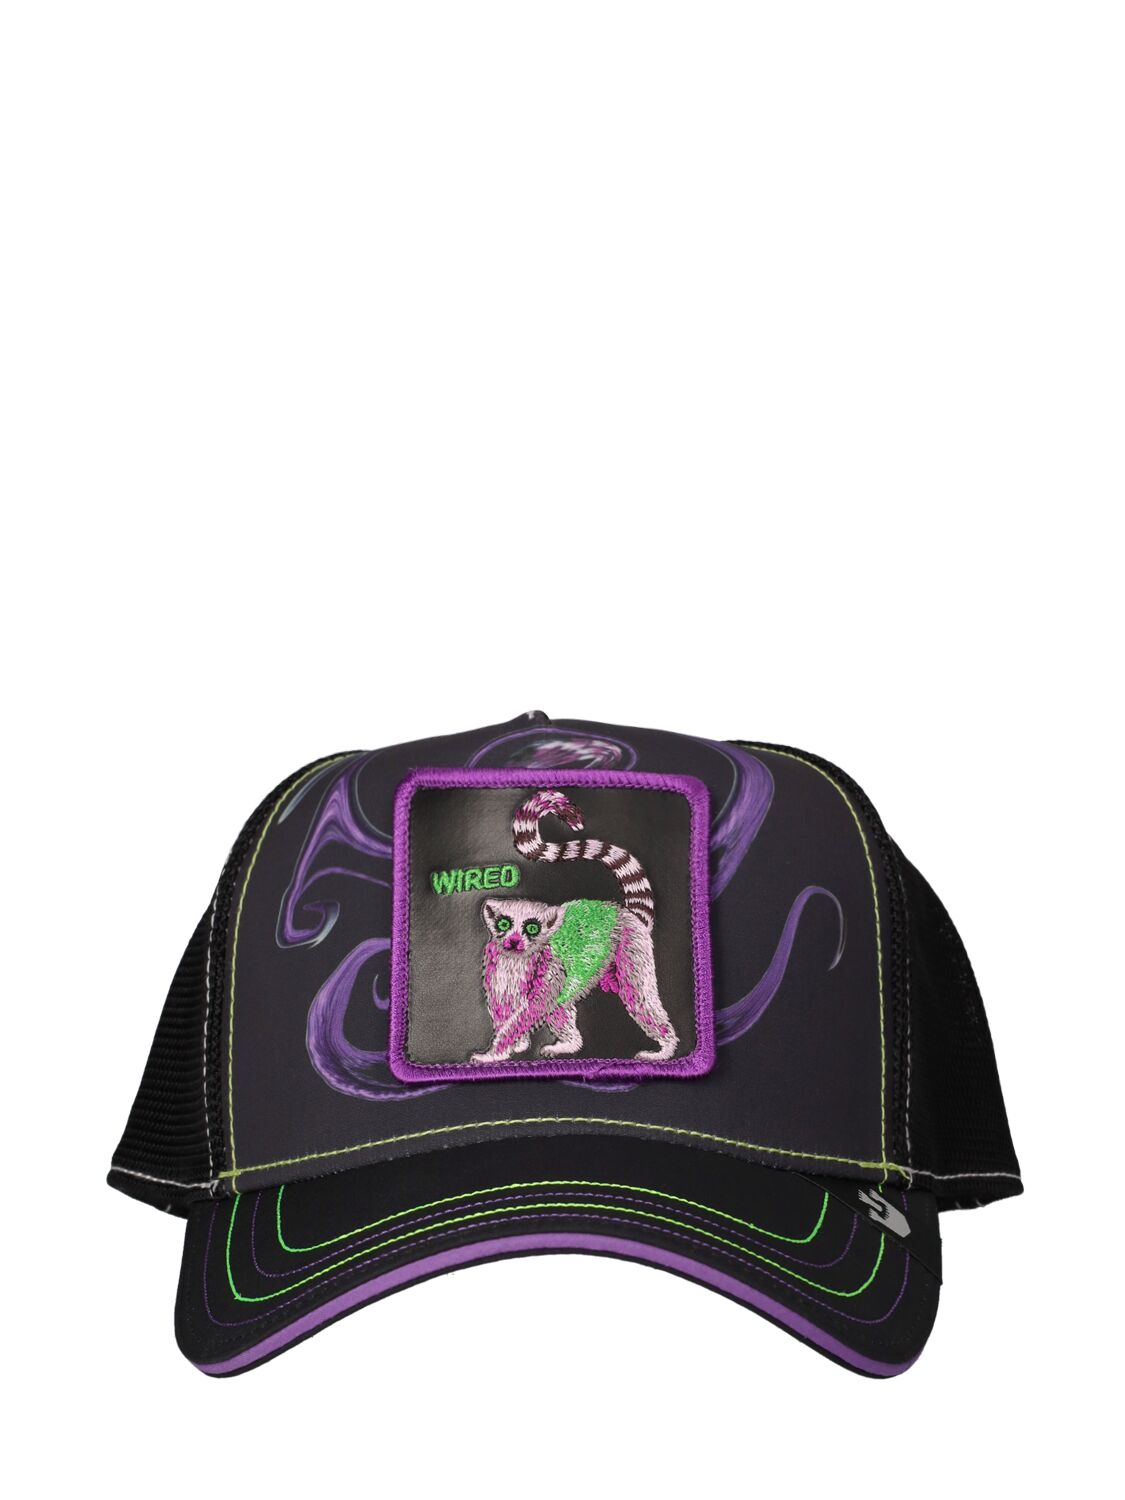 Image of Www.iiired Drip Cap W/patch